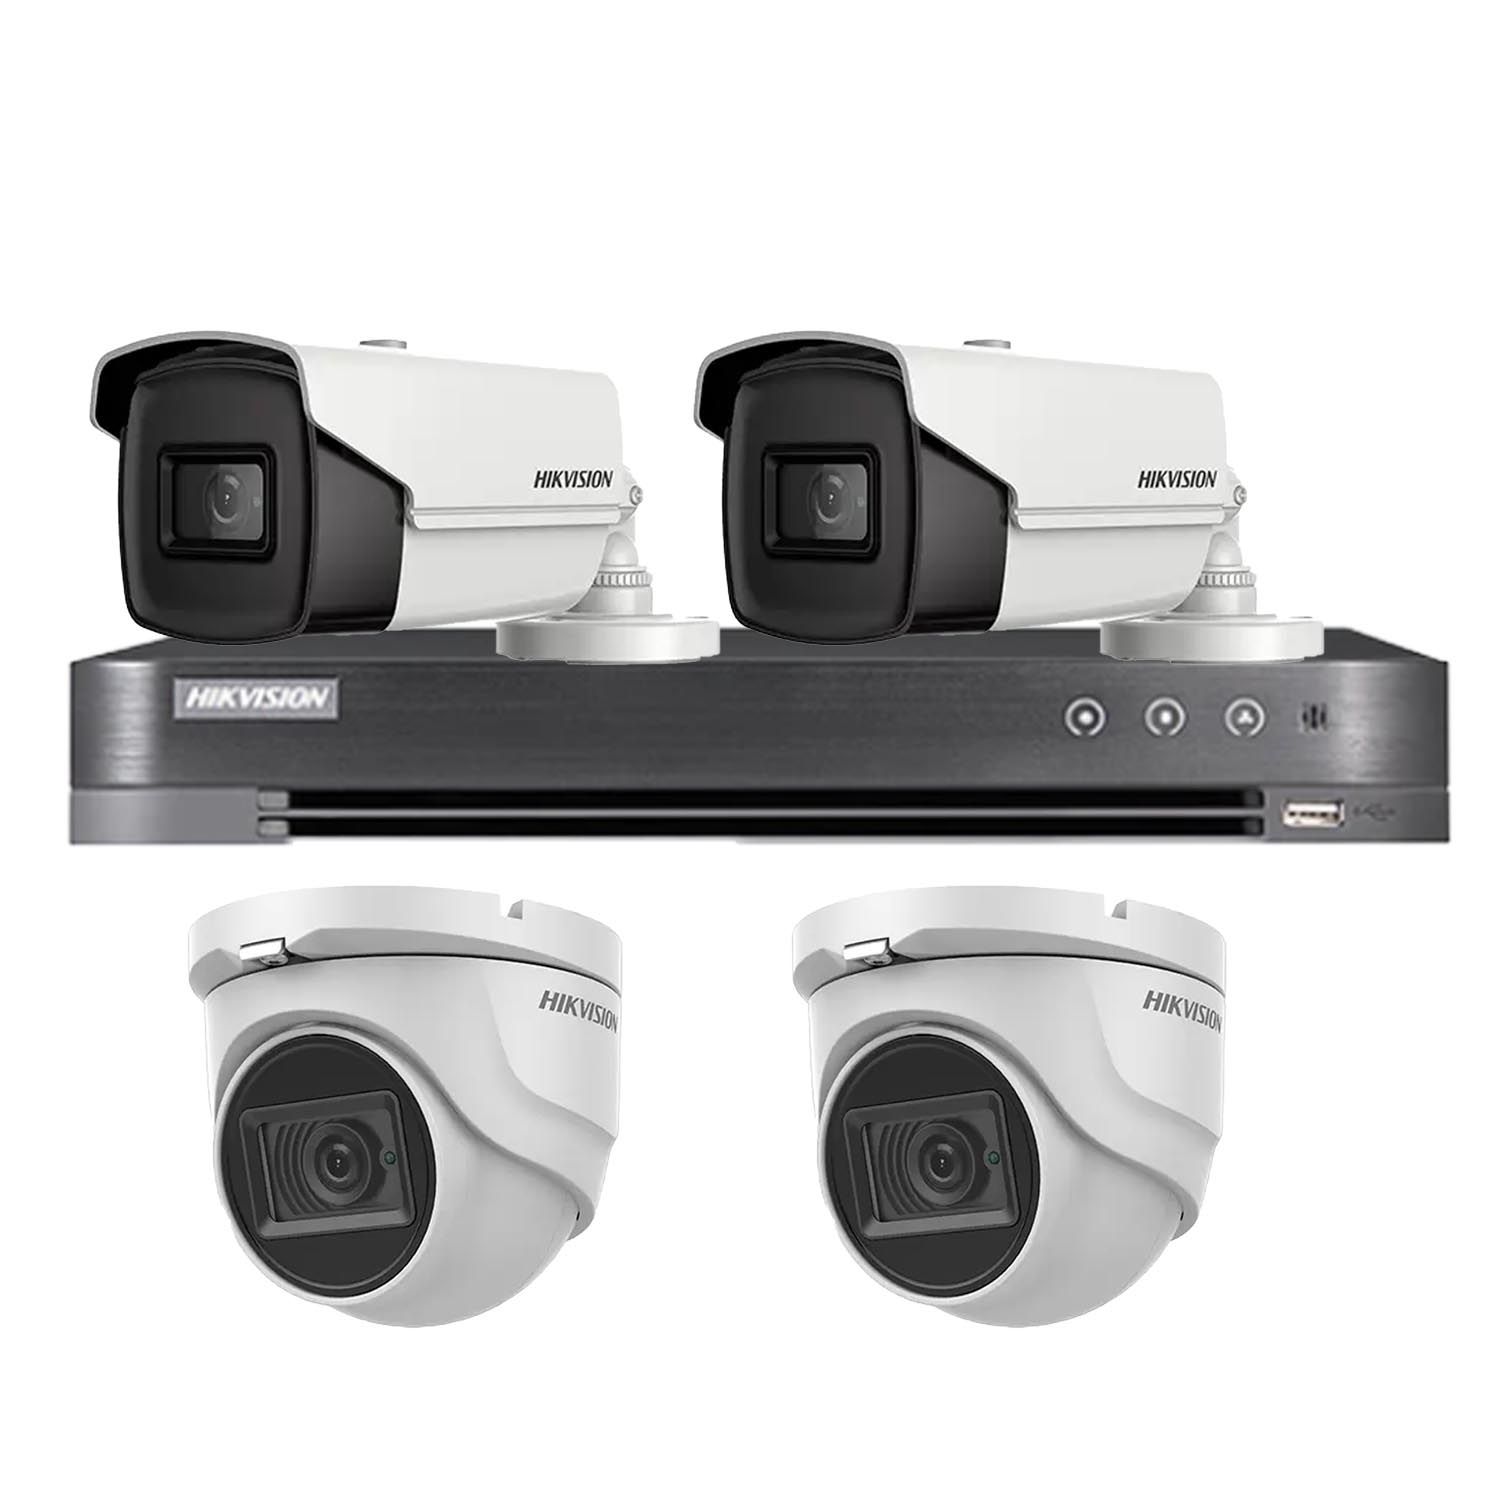 Sistem supraveghere Hikvision mixt, 2 camere interior 8MP 4 in 1, IR 30m, 2 camere exterior 4 in 1 8MP IR80m, DVR 4 canale 4K 8MP SafetyGuard Surveillance